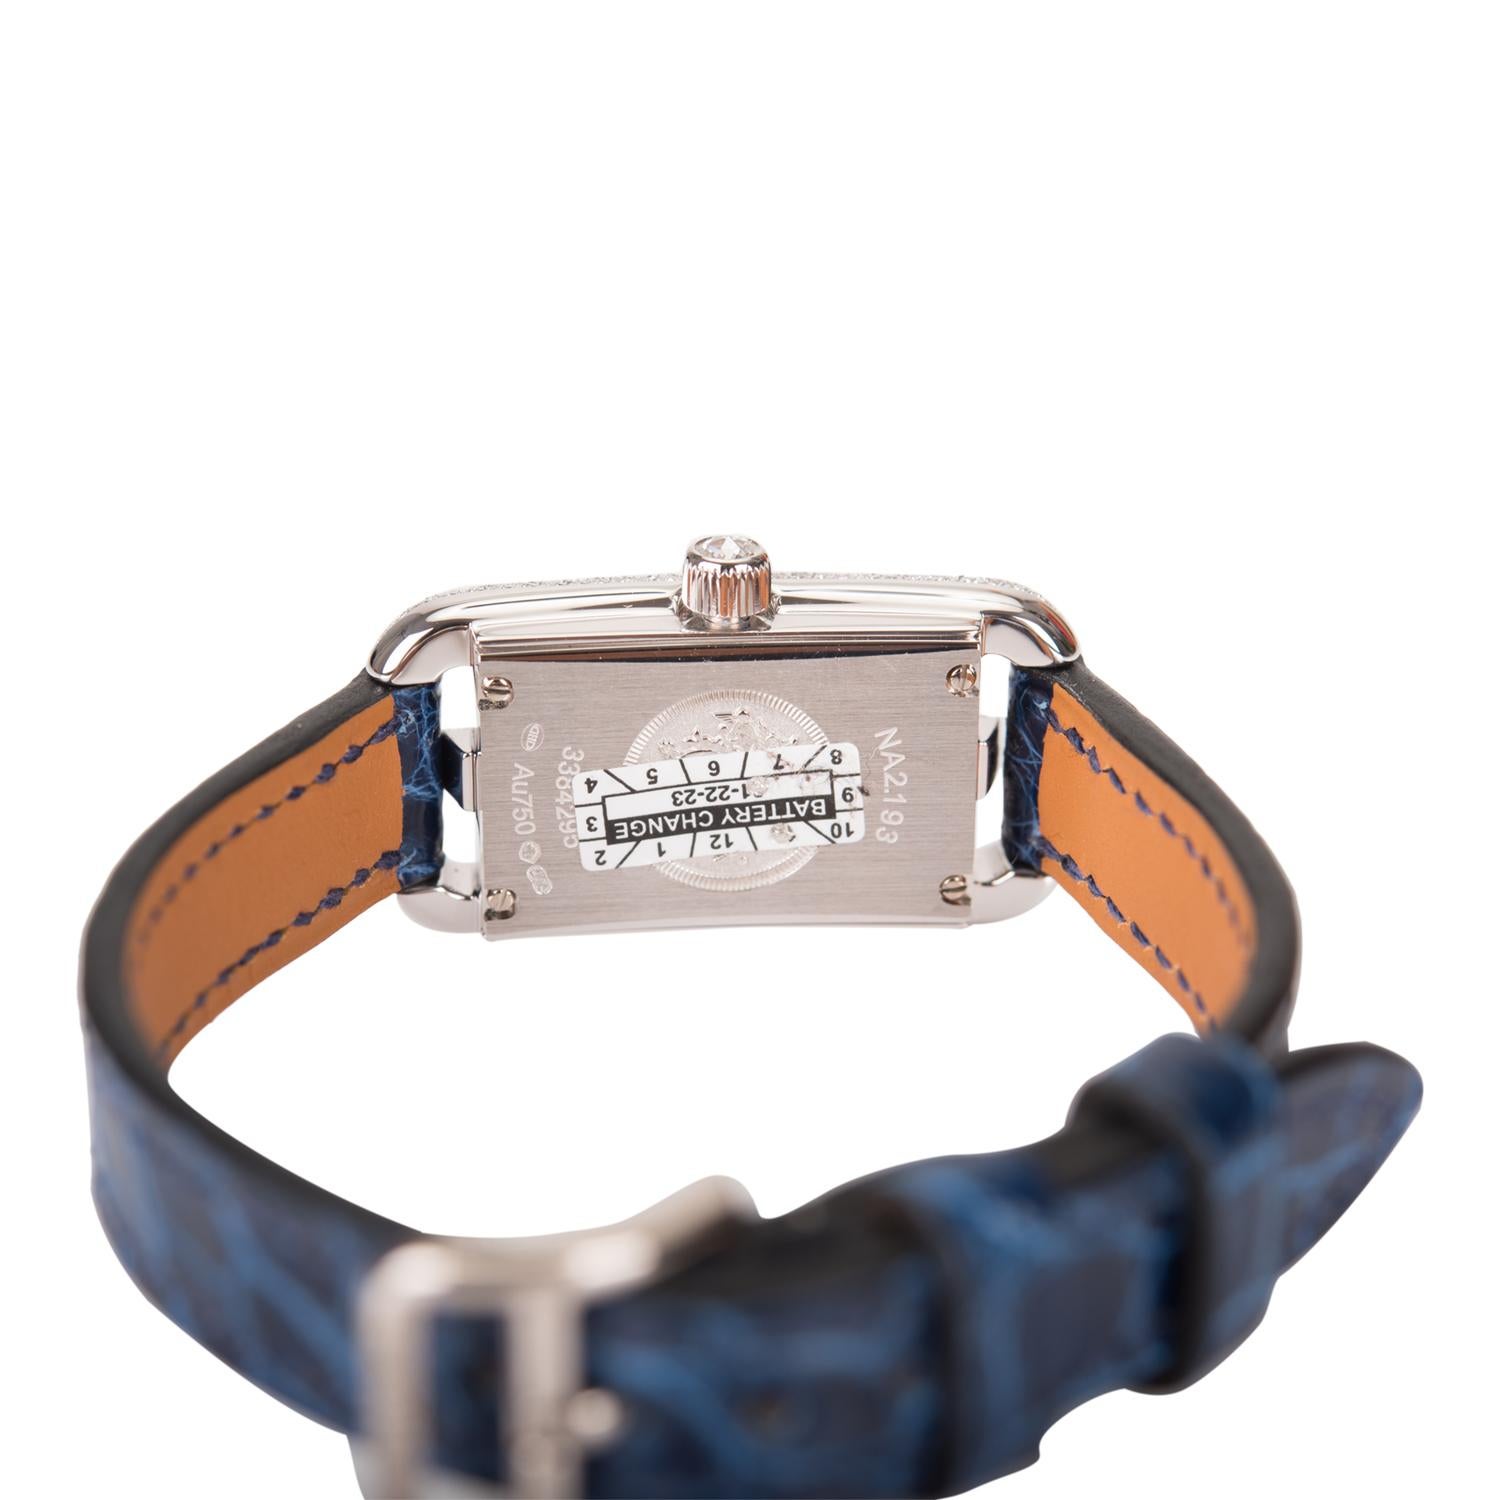 Rare Limited Edition Diamond Watch
Brand New 
This watch currently retail cost $50000.00 at Hermes

A special evening calls for some razzle dazzle
This is Perfection

She will love you forever

Nantucket
Aventurine Diamond 18K White Gold Watch
Blue